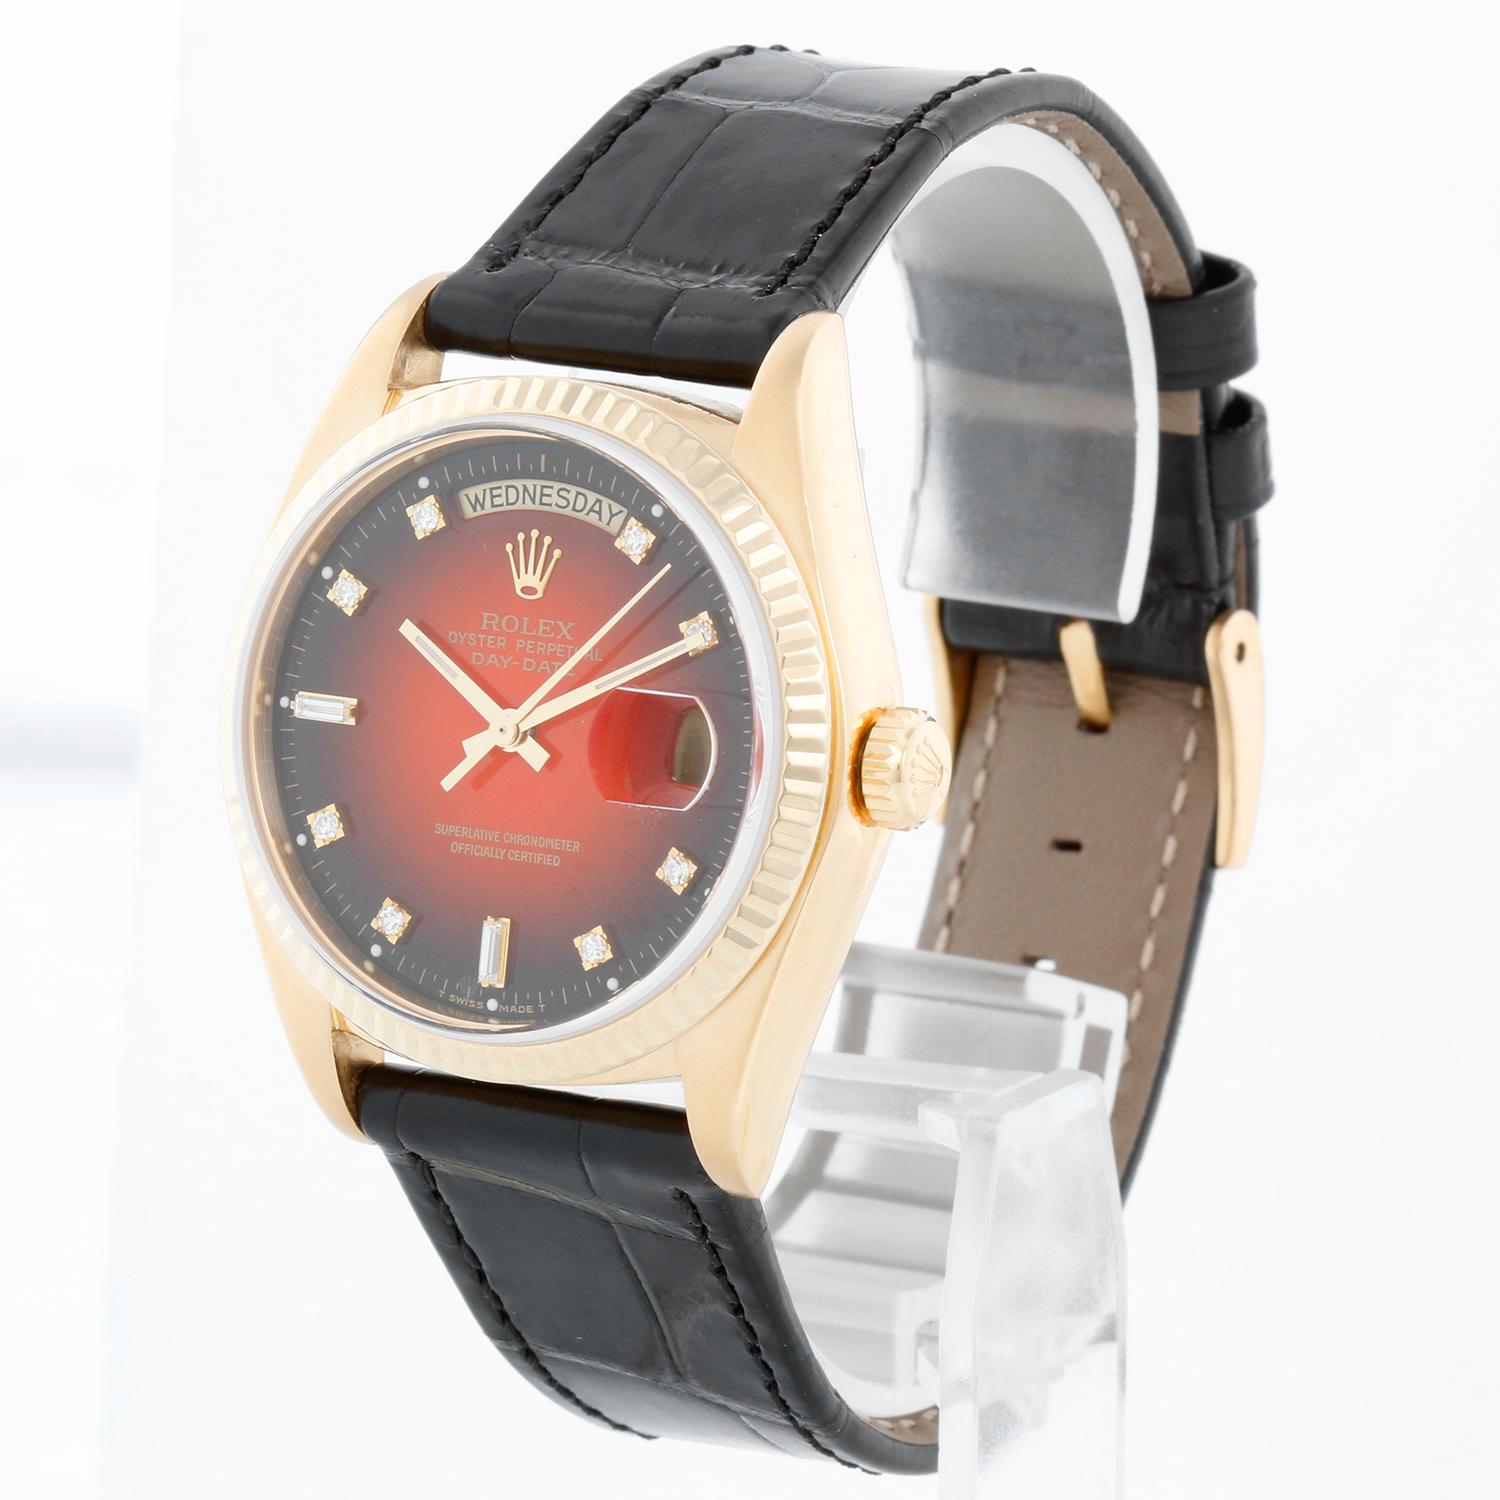 Rolex President Day-Date Men's 18k Gold Watch 18038 - Automatic winding; quick-set; sapphire crystal ( 36 mm) . 18k yellow gold case with fluted bezel . Factory Red Vignette dial . Black Rolex leather band with Rolex buckle . Pre-owned with Rolex